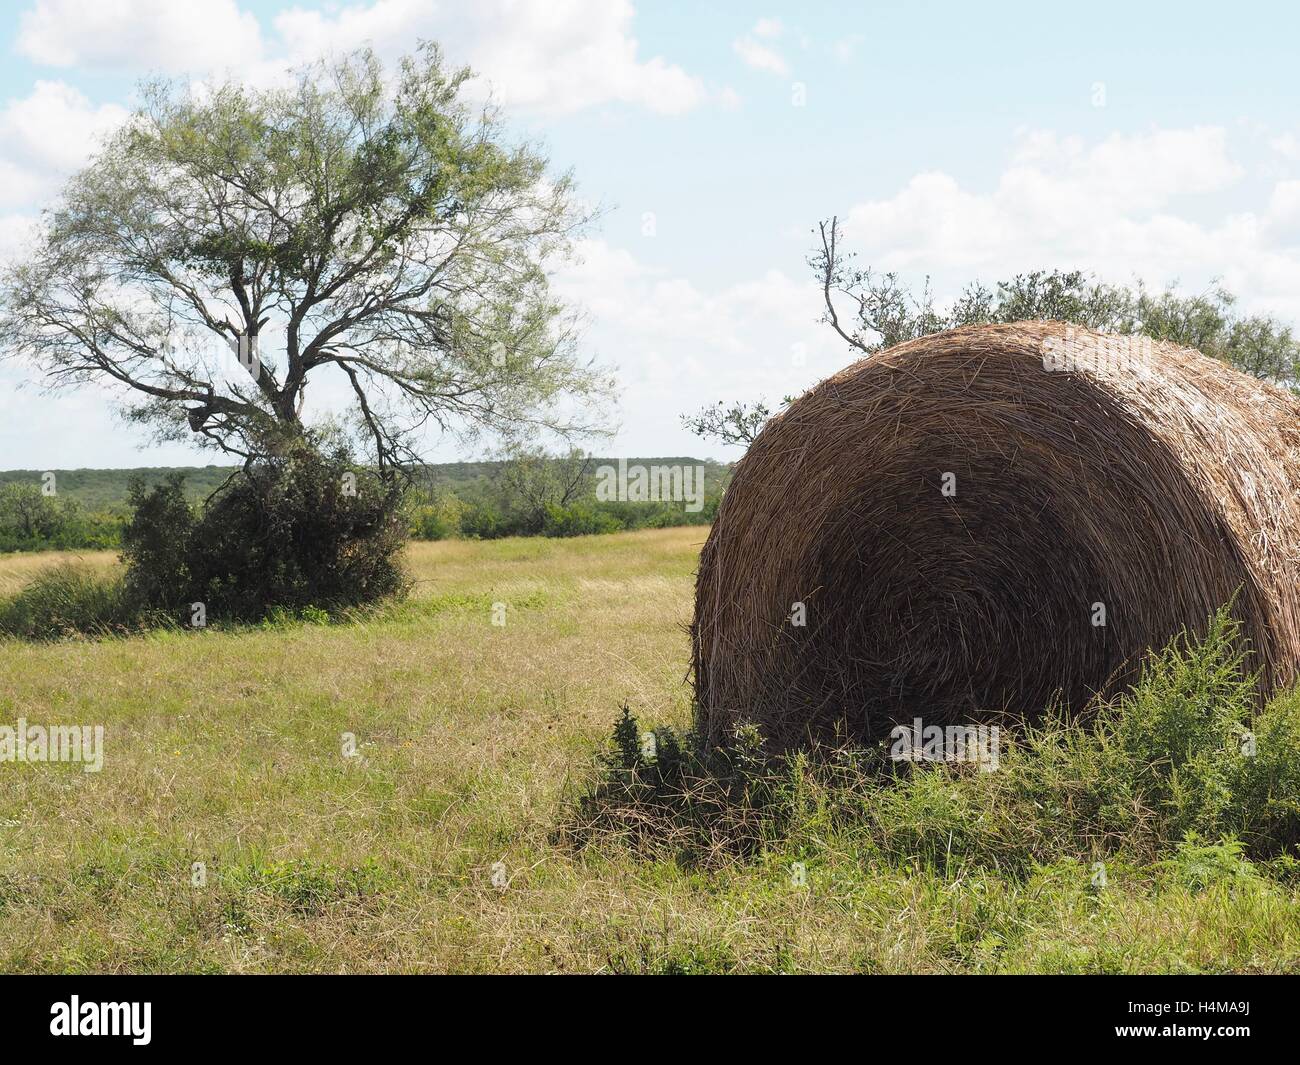 Hay bale in south Texas Stock Photo